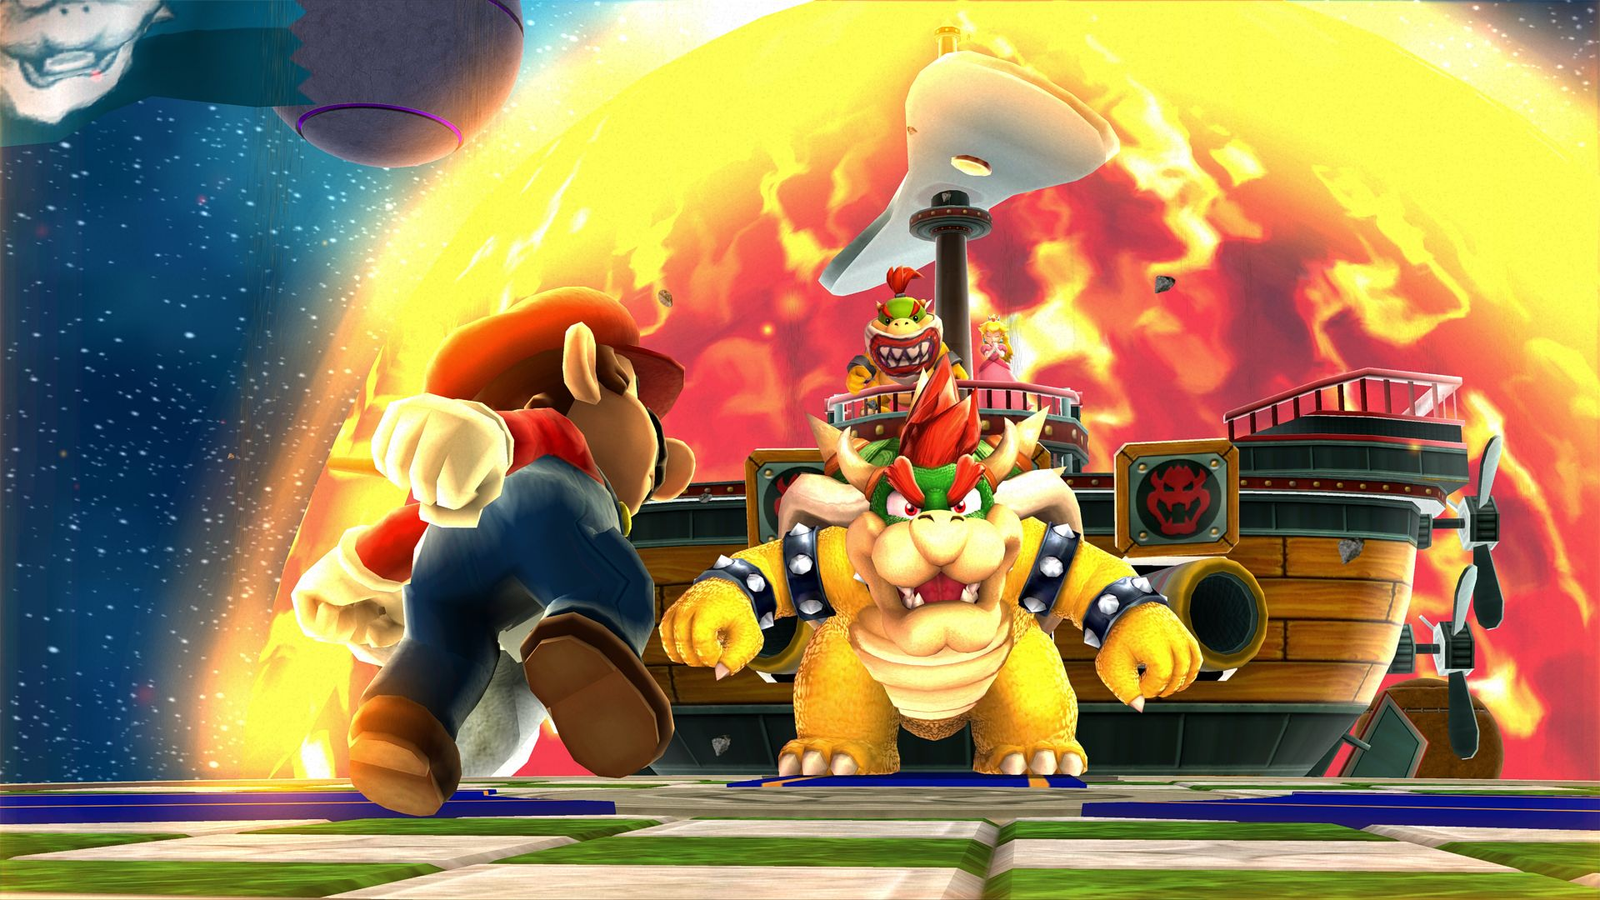 The solid legal theory behind Nintendo's new emulator takedown